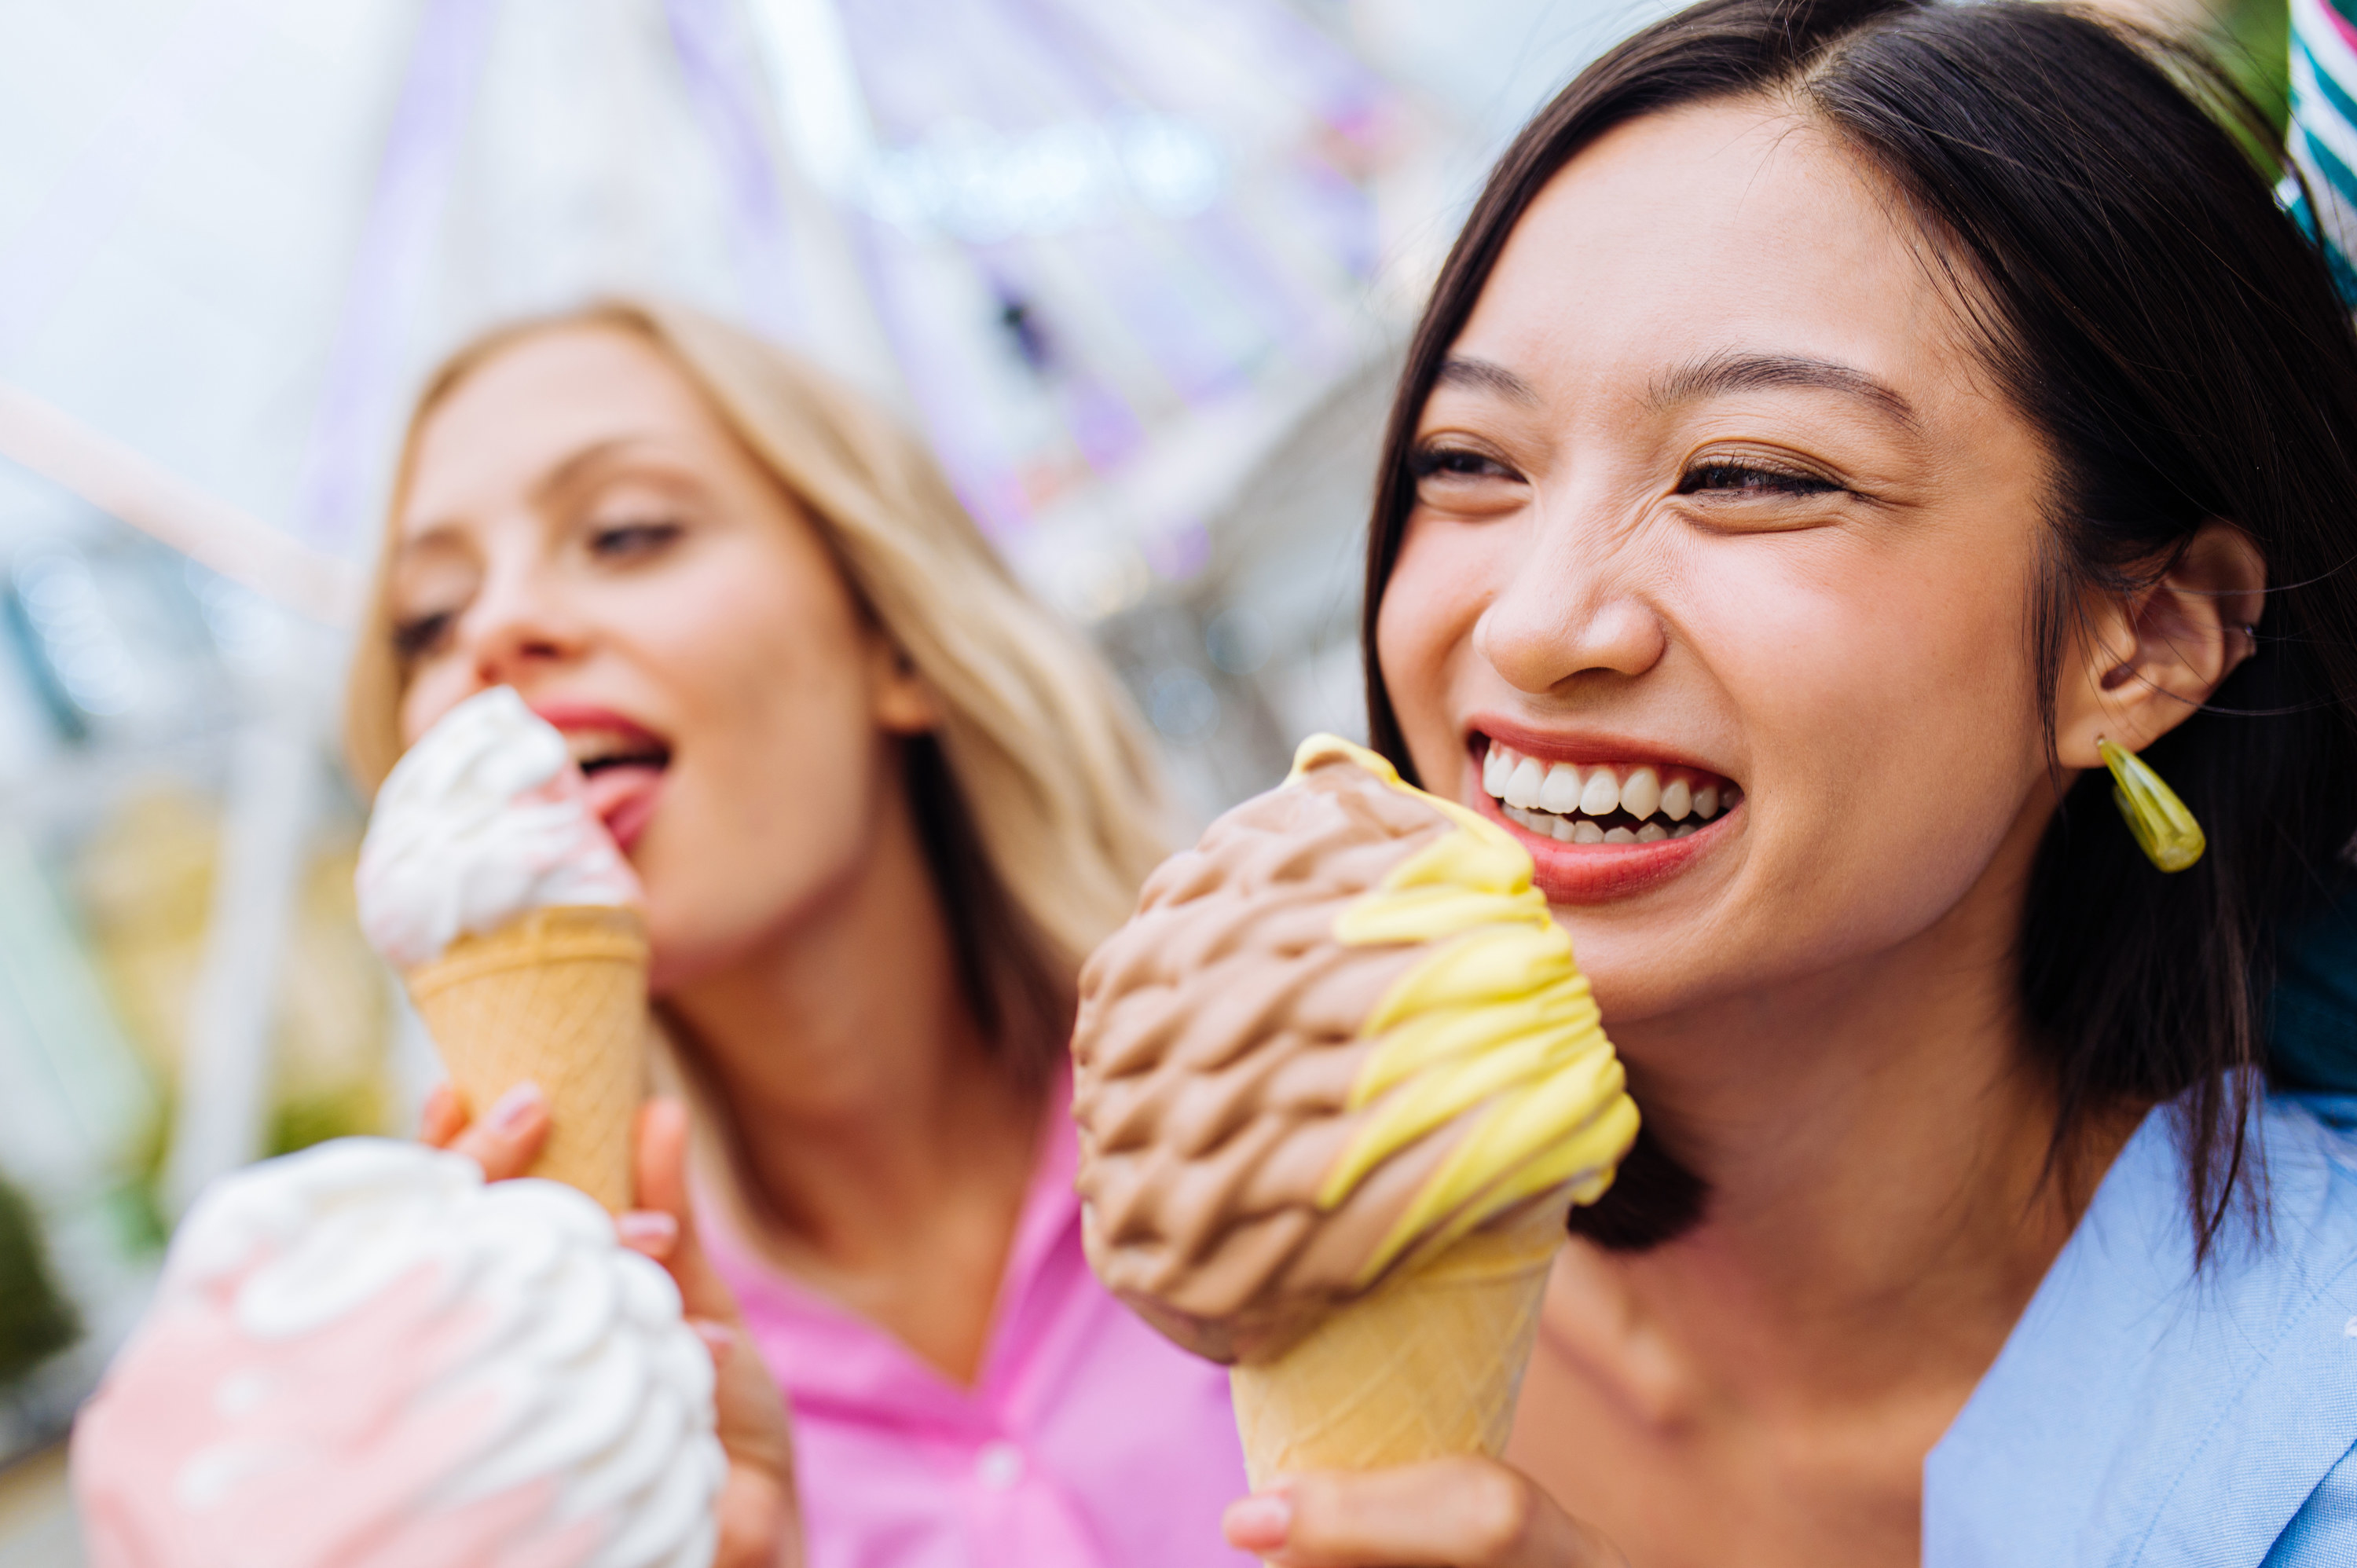 An image of two friends enjoying brightly coloured whipped ice creams